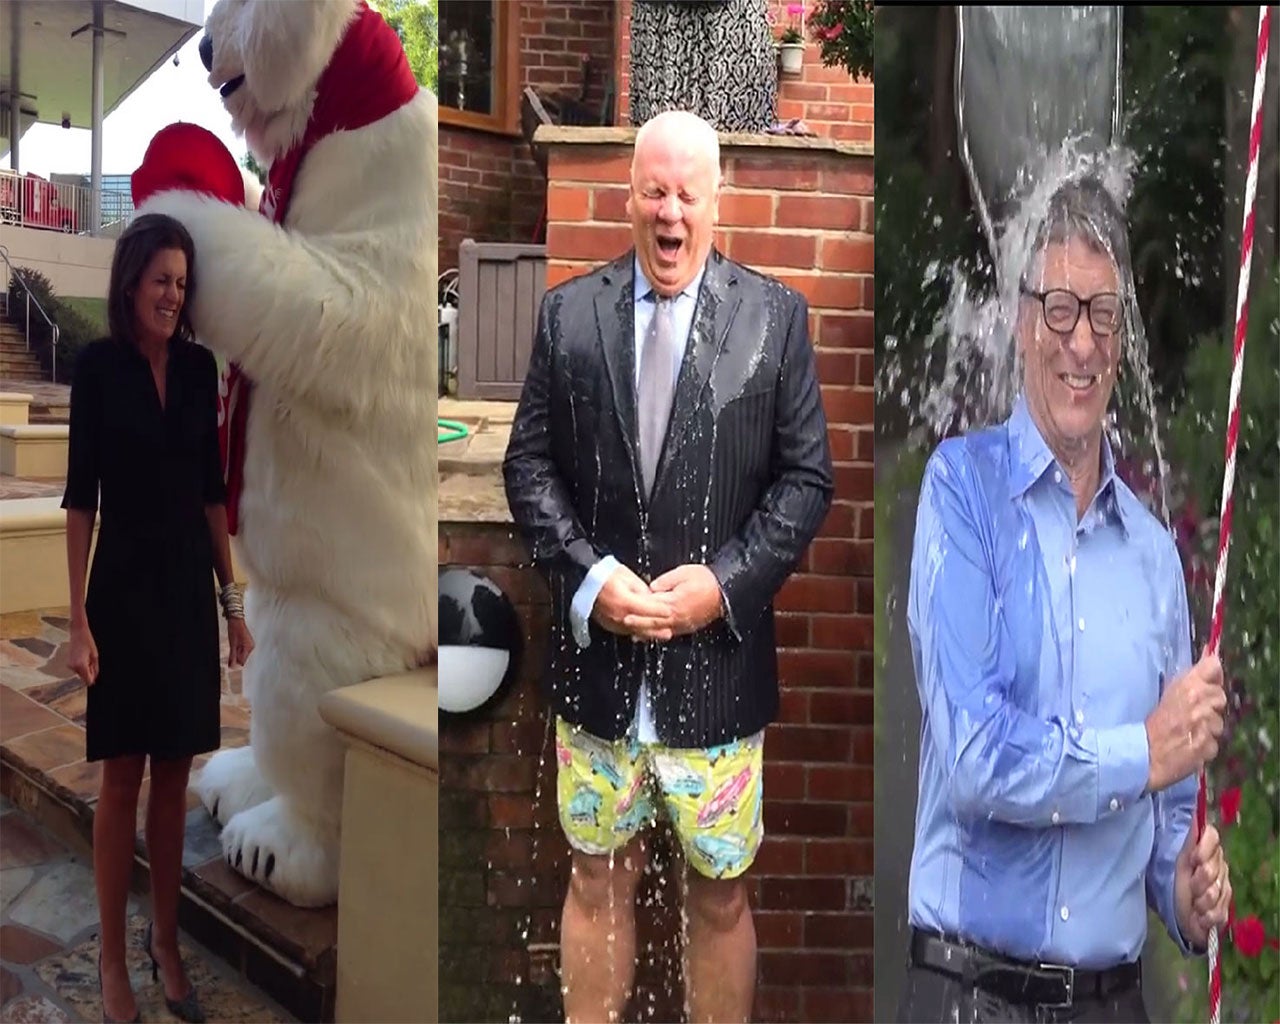 Wendy Clark, Phil J Clarke and Bill Gates get soaked